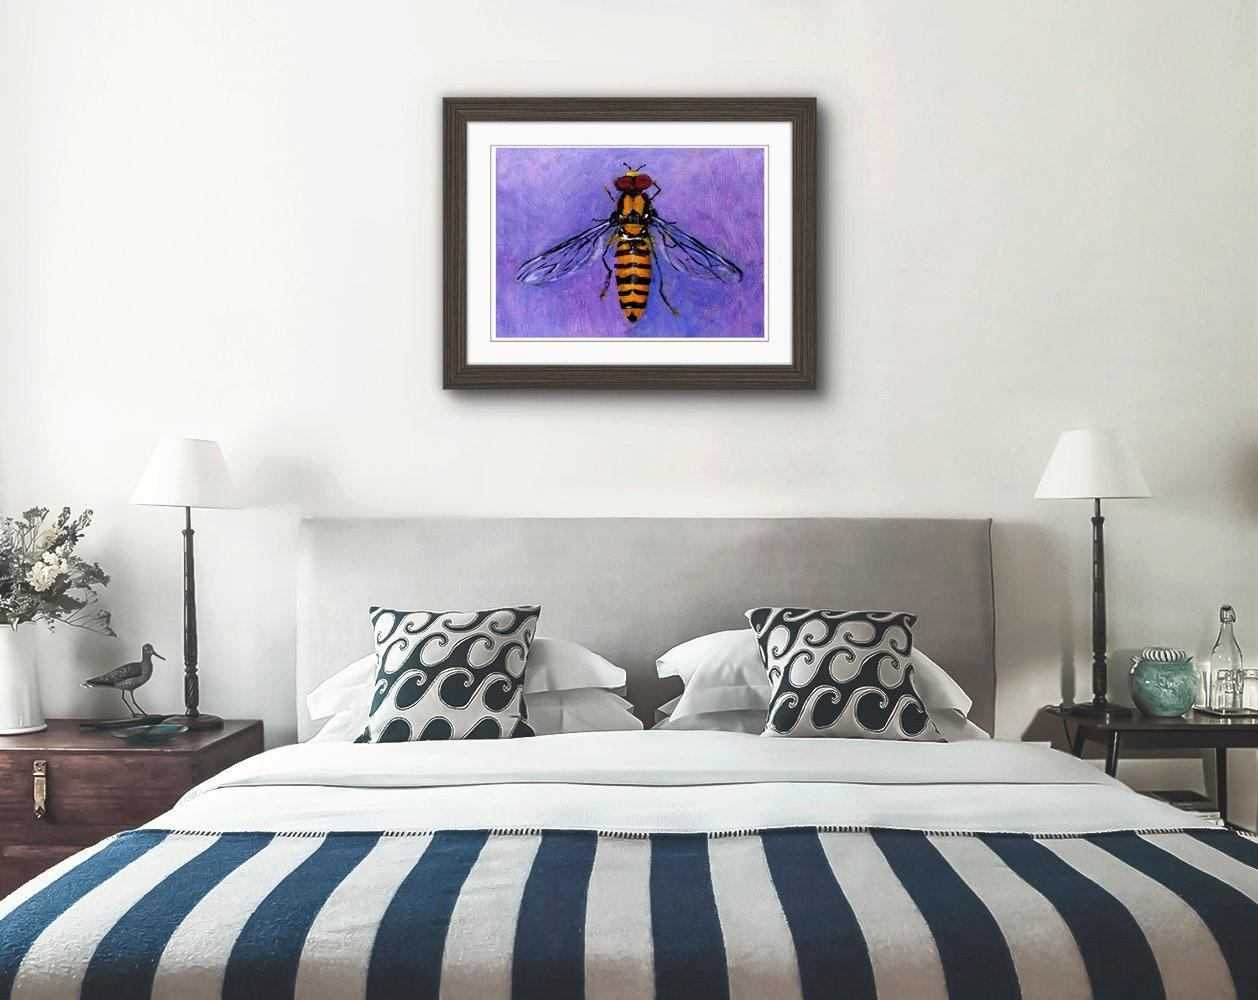 Marmalade Hover Fly Painting Numbered limited edition Giclee Print of an Acrylic Painting ArtbyMyleslaurence